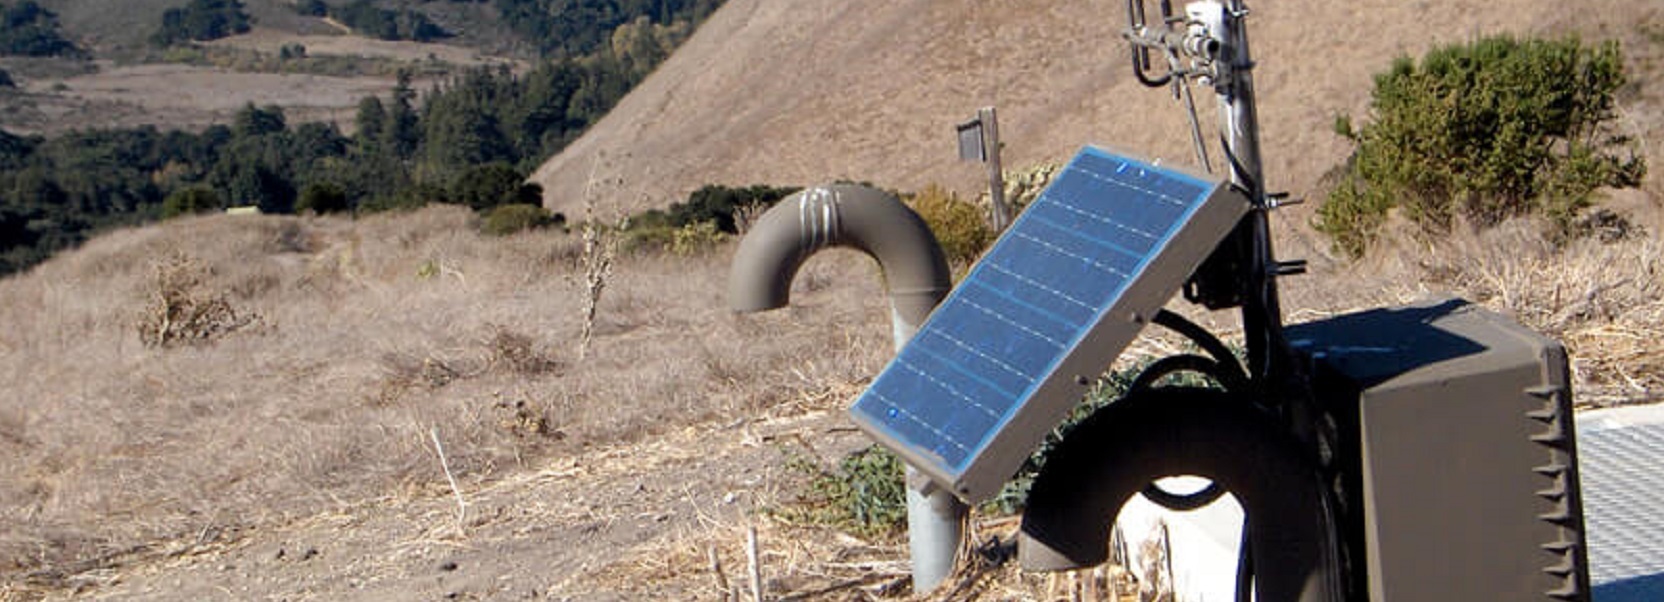 Image: Santa Lucia Preserve: Water distribution SCADA and communication system